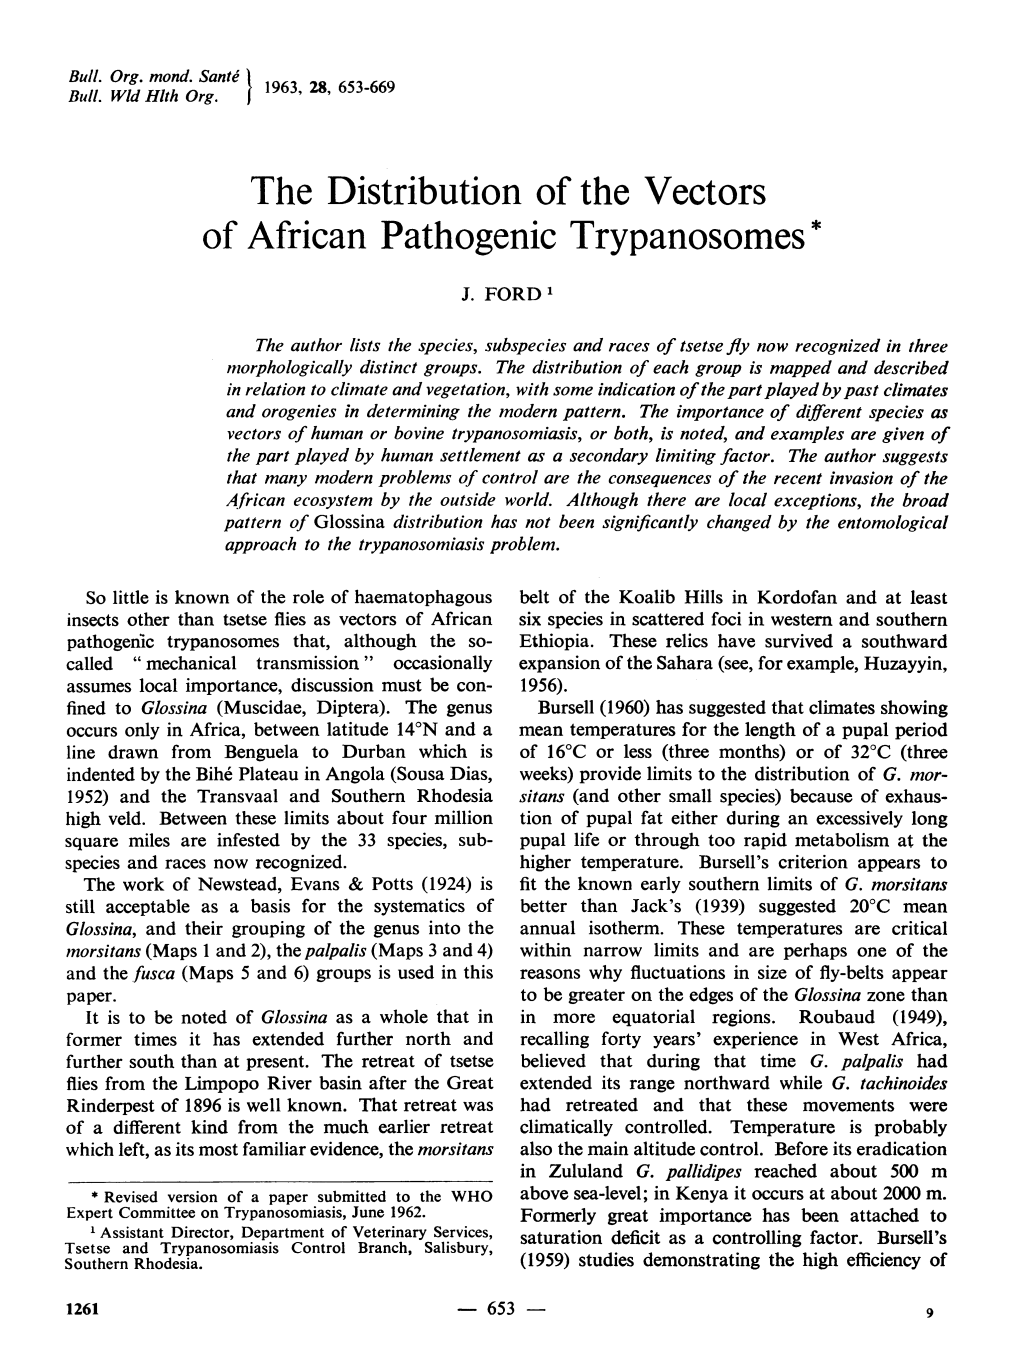 The Distribution of the Vectors of African Pathogenic Trypanosomes*